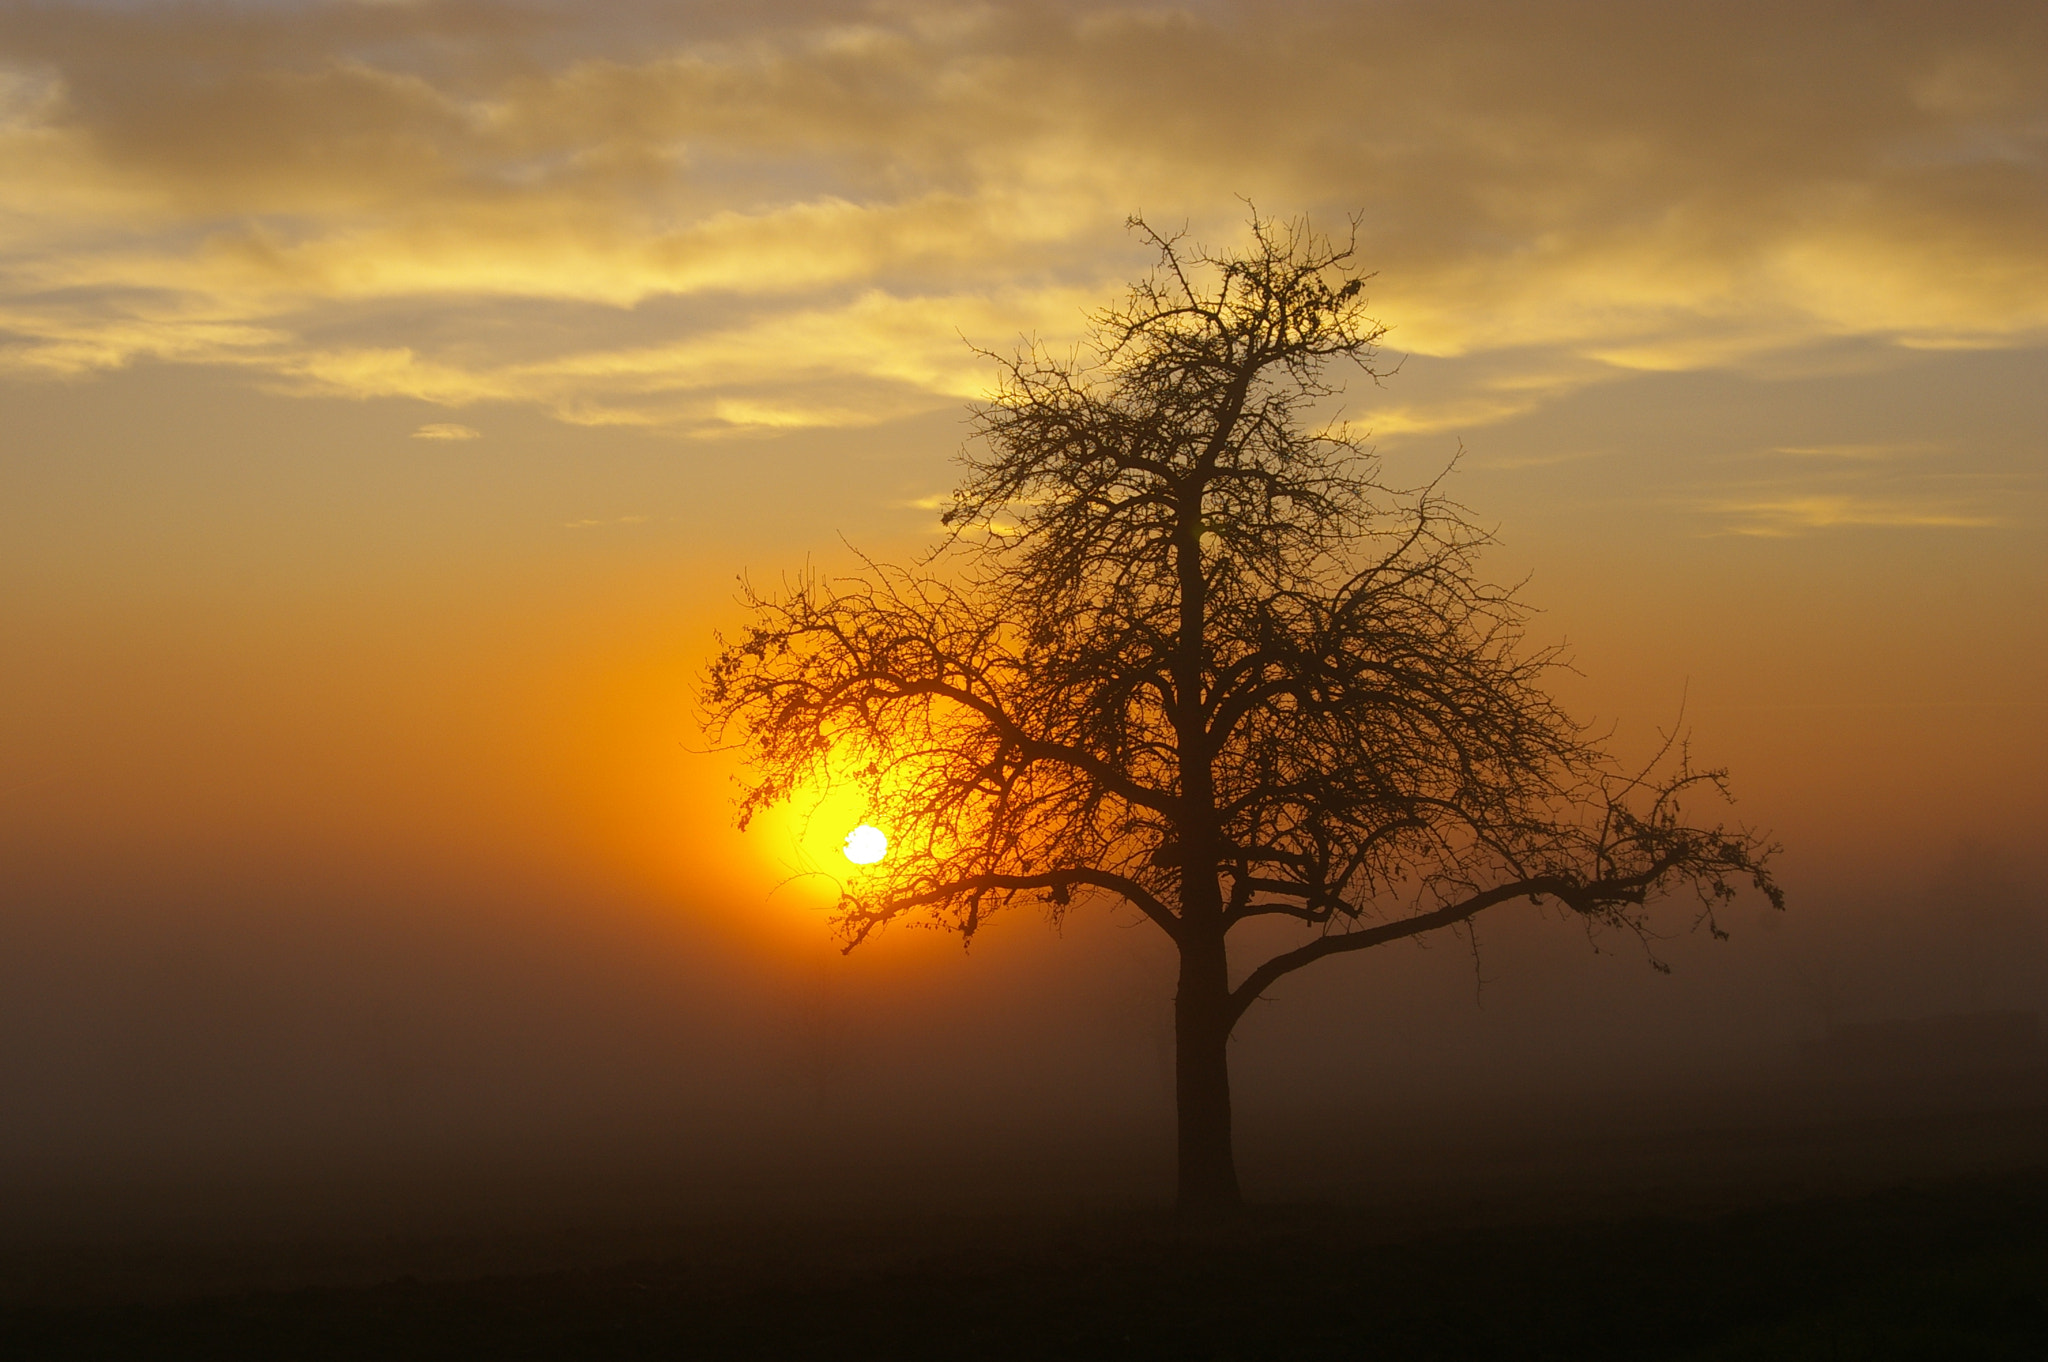 Pentax K100D Super sample photo. Lonely tree in a foggy sunset photography